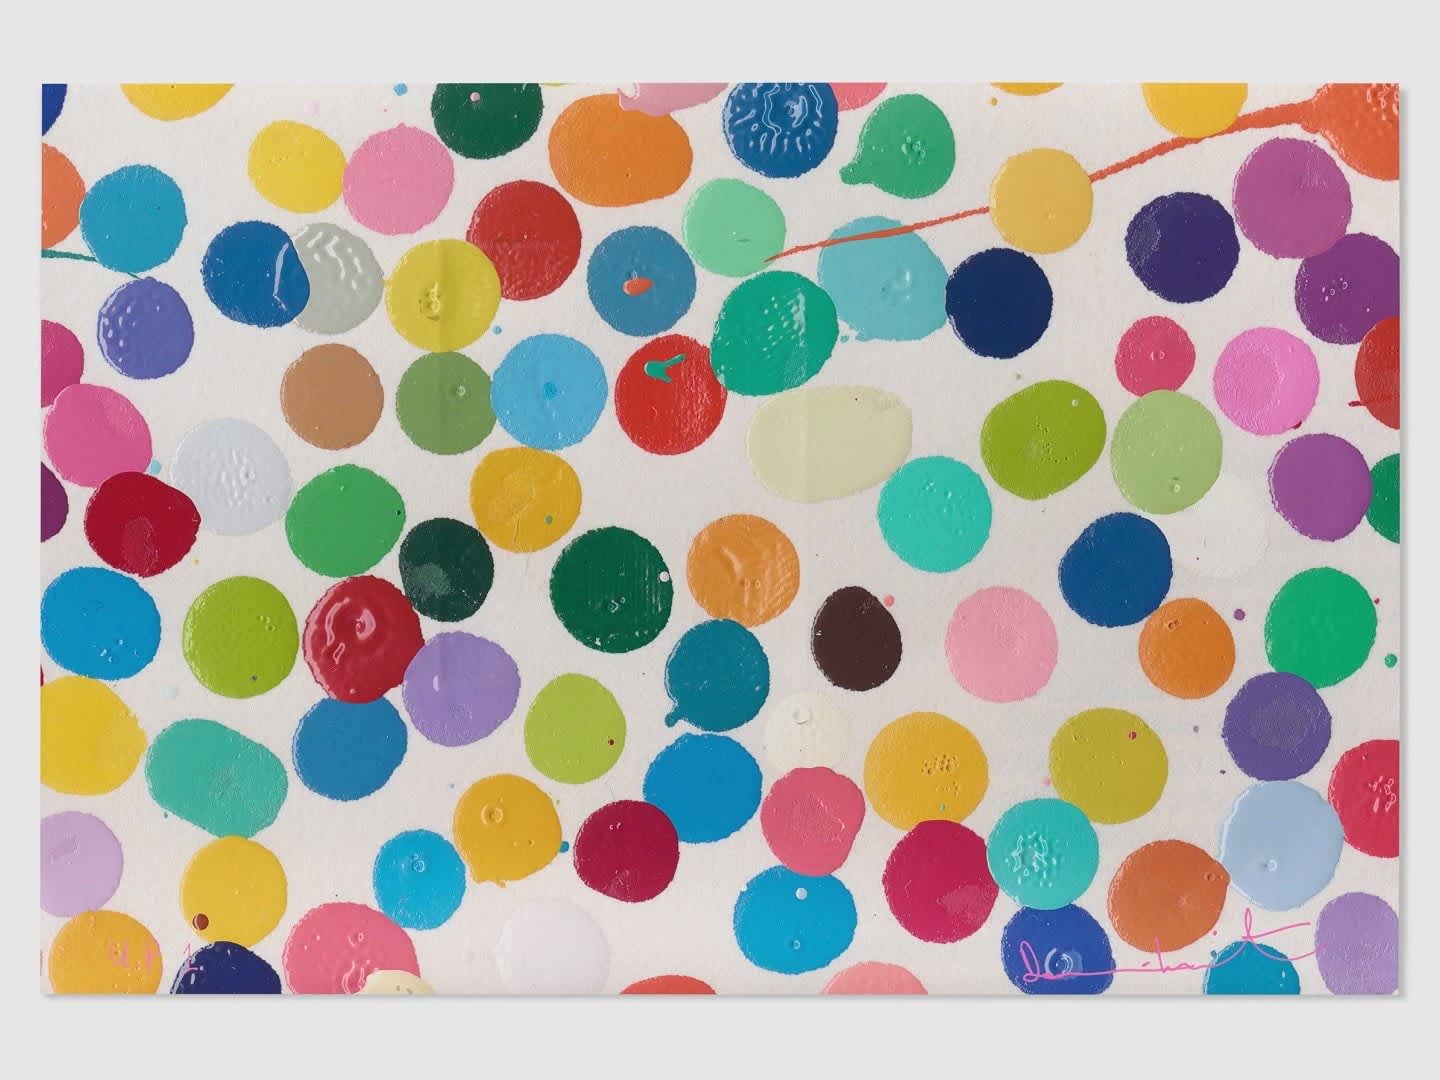 Damien Hirst H11 - The Currency Unique Print Archival Quality Giclée Reproduction on Heavy Weight Enhanced Matte Professional Stock